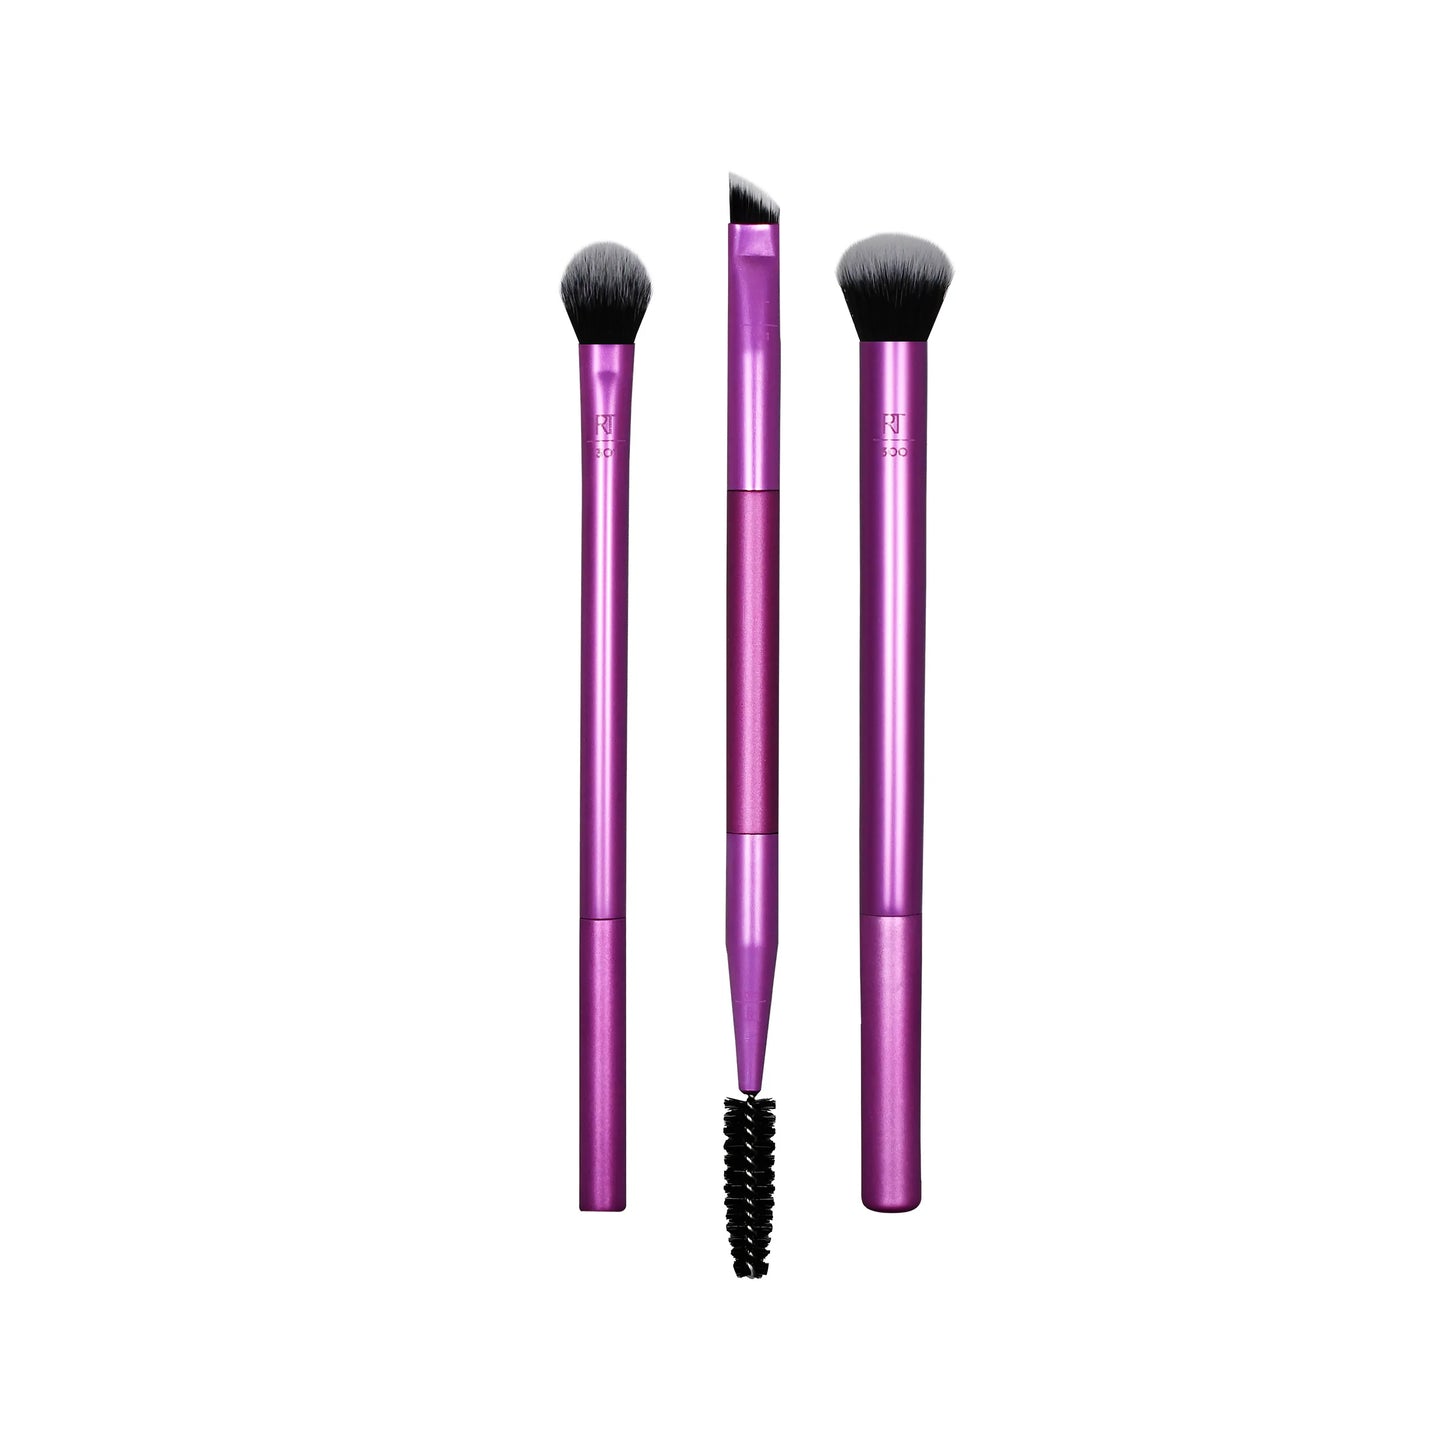 REAL TECHNIQUES Eye Shade & Blend Makeup Brush Trio